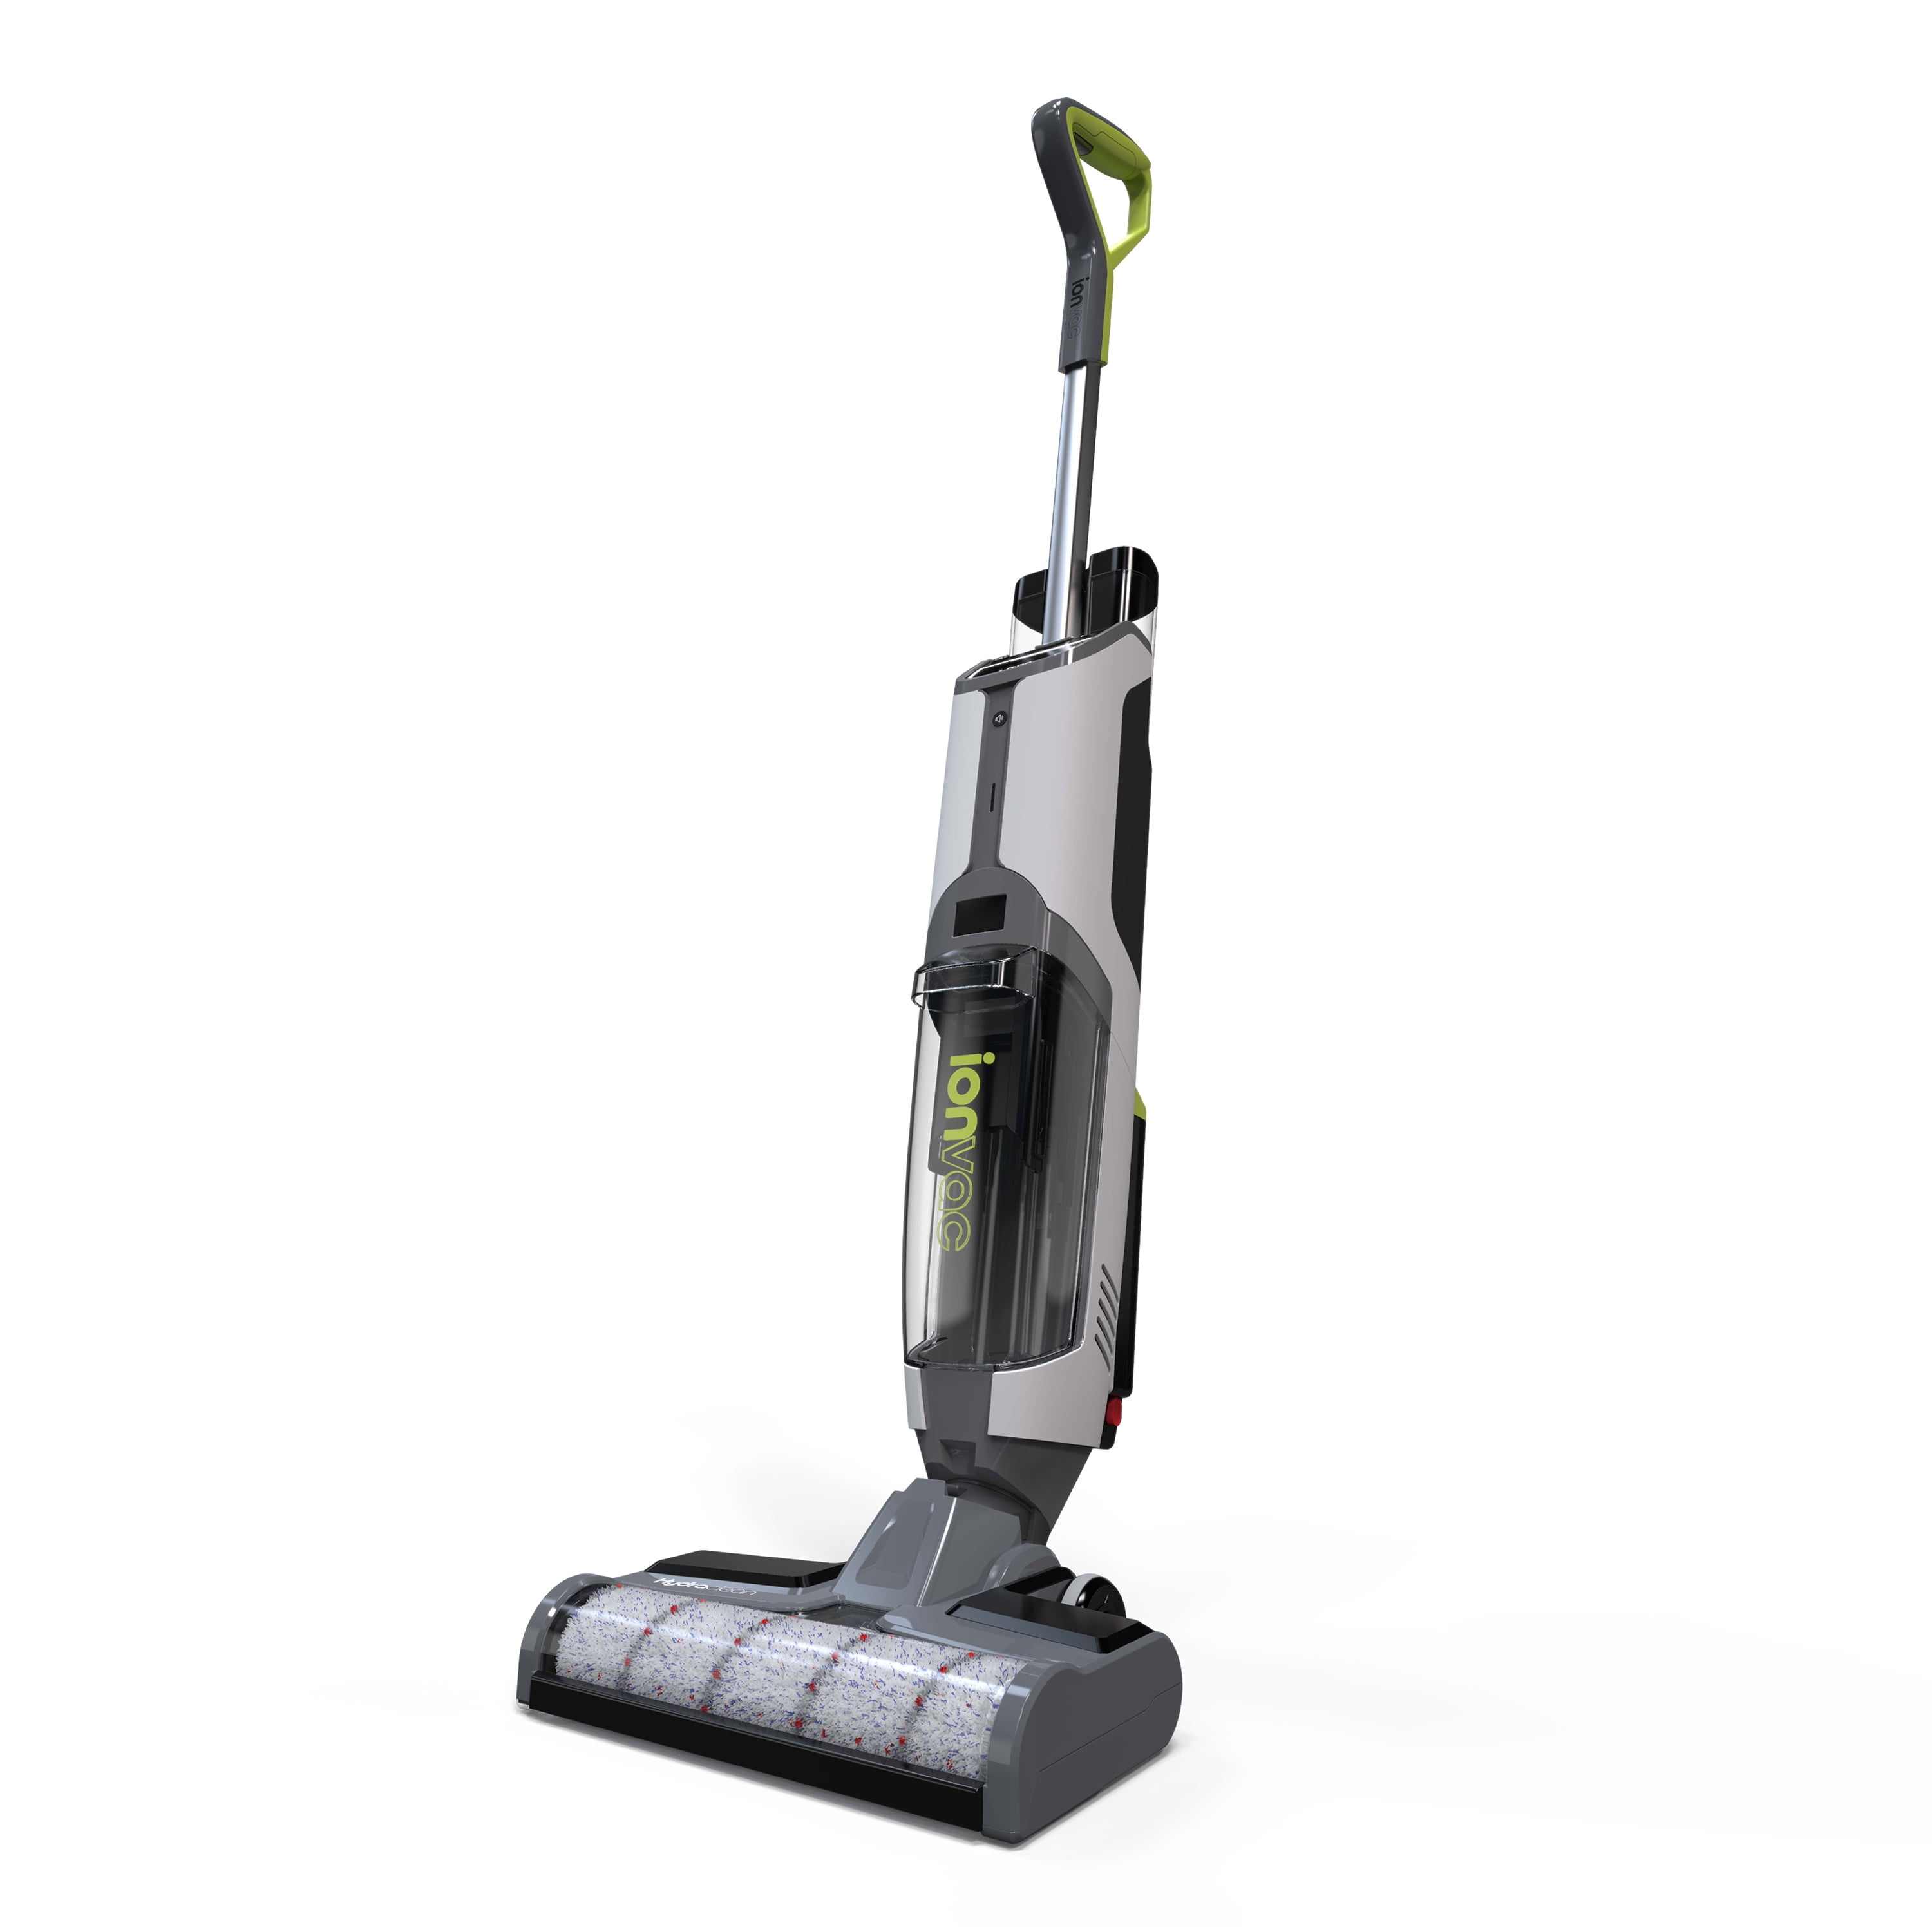 Ionvac Hydraclean Cordless All In One, Vacuum Cleaner For Carpet And Hardwood Floors